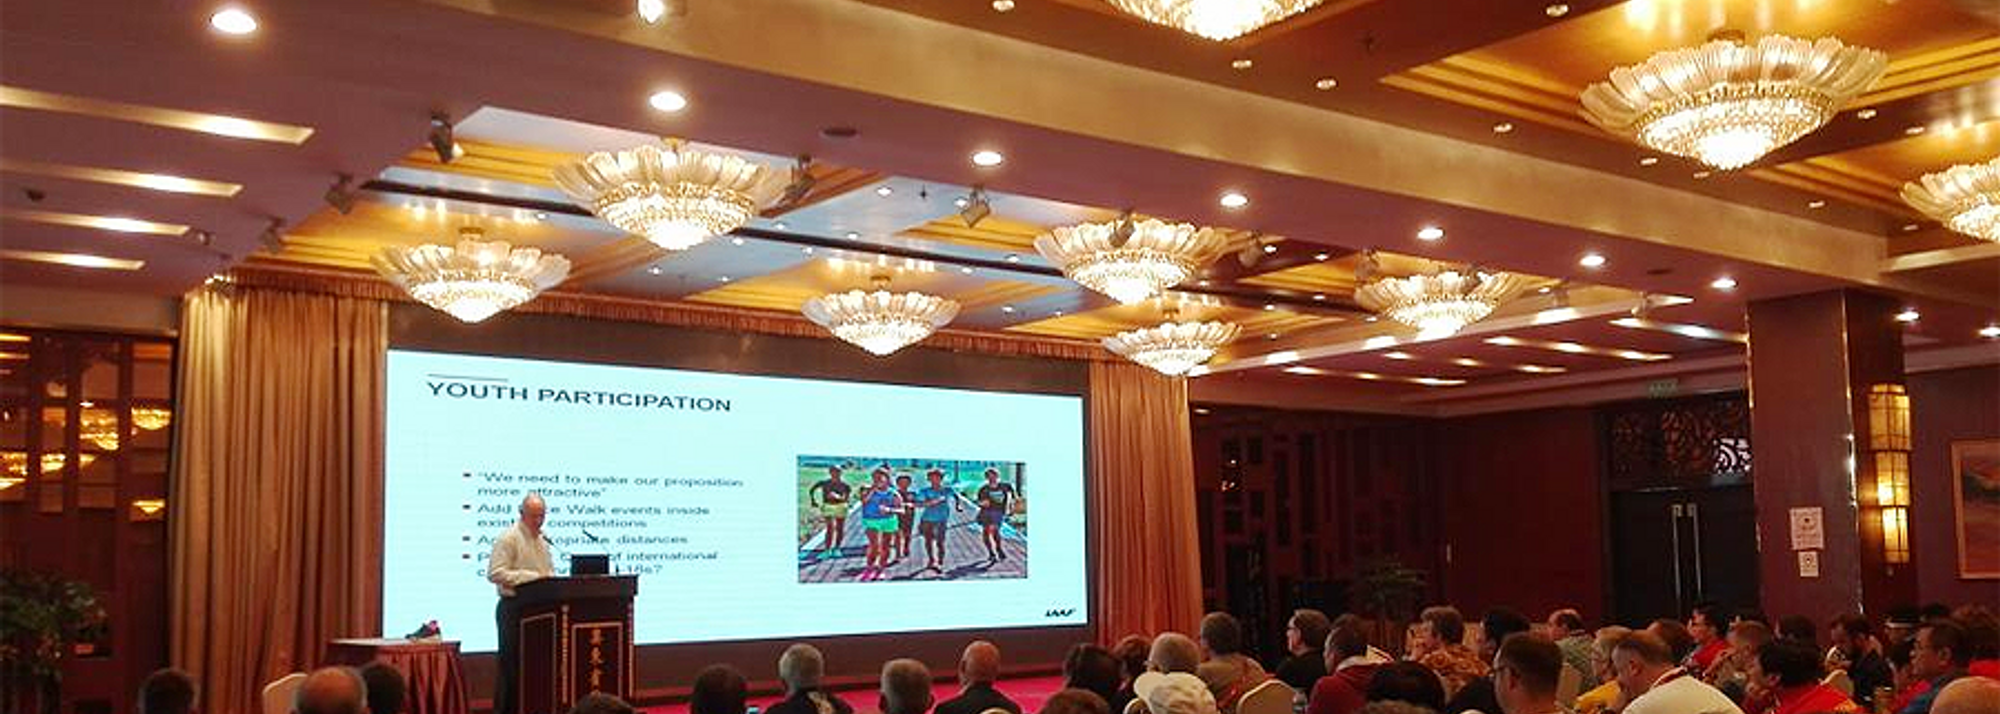 With the support of the IAAF, the IAAF Race Walking Committee organised and hosted a seminar on Friday 4 May in advance of the IAAF World Race Walking Team Championships Taicang 2018.